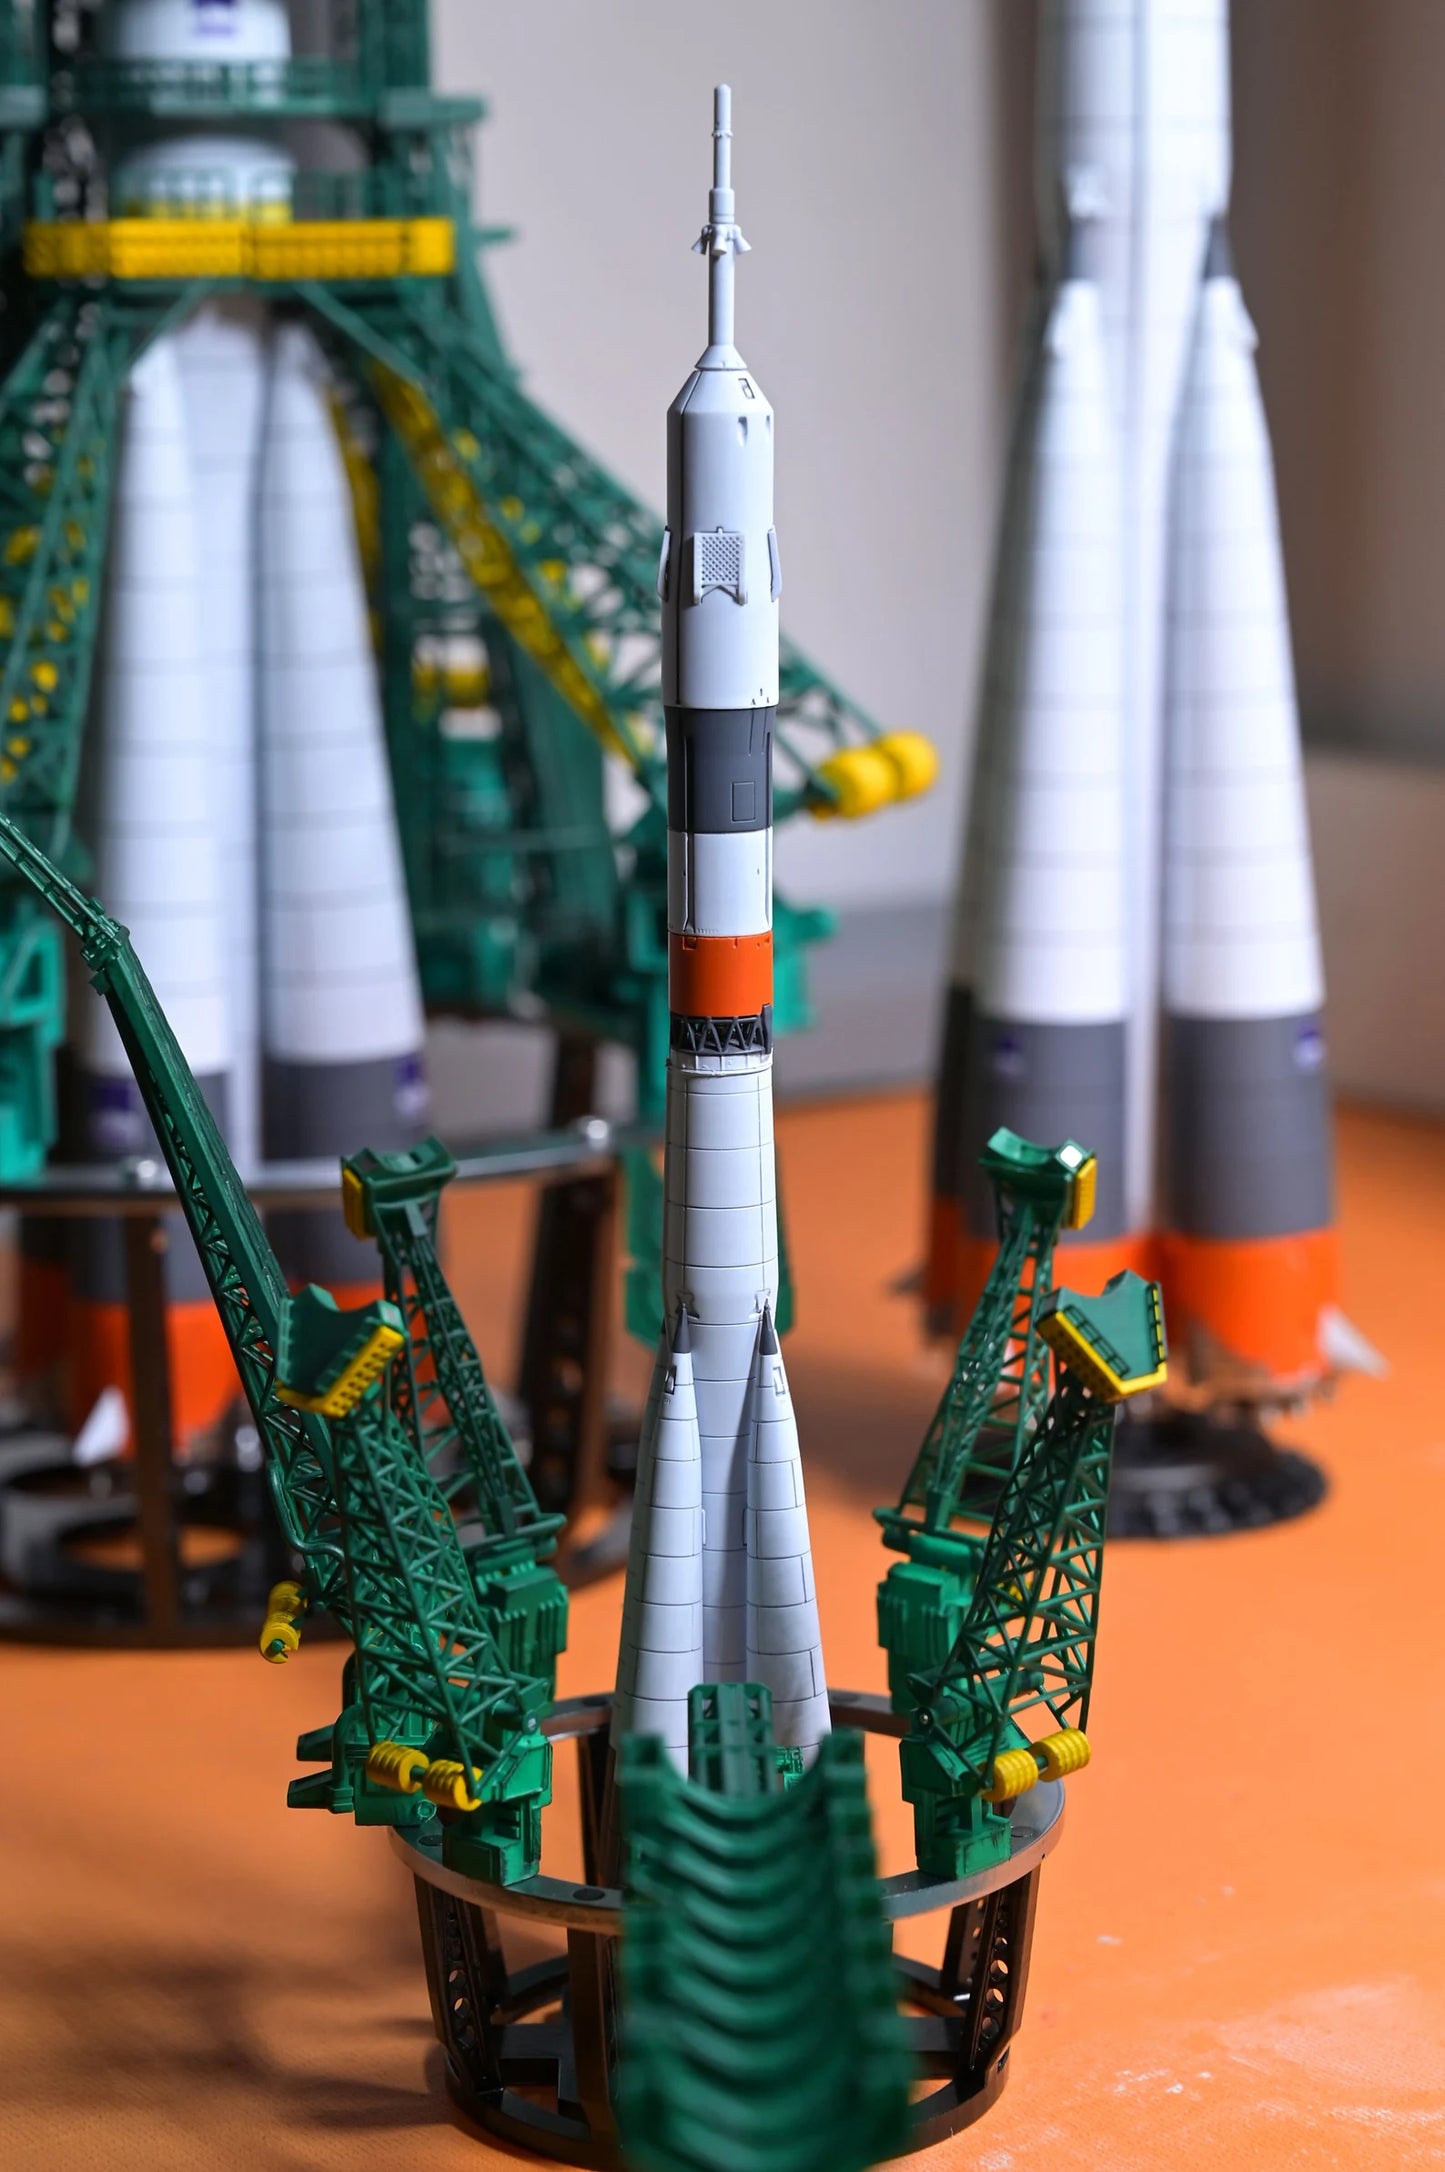 Soyz 2.1A on the launch pad Russian rocket high quality model